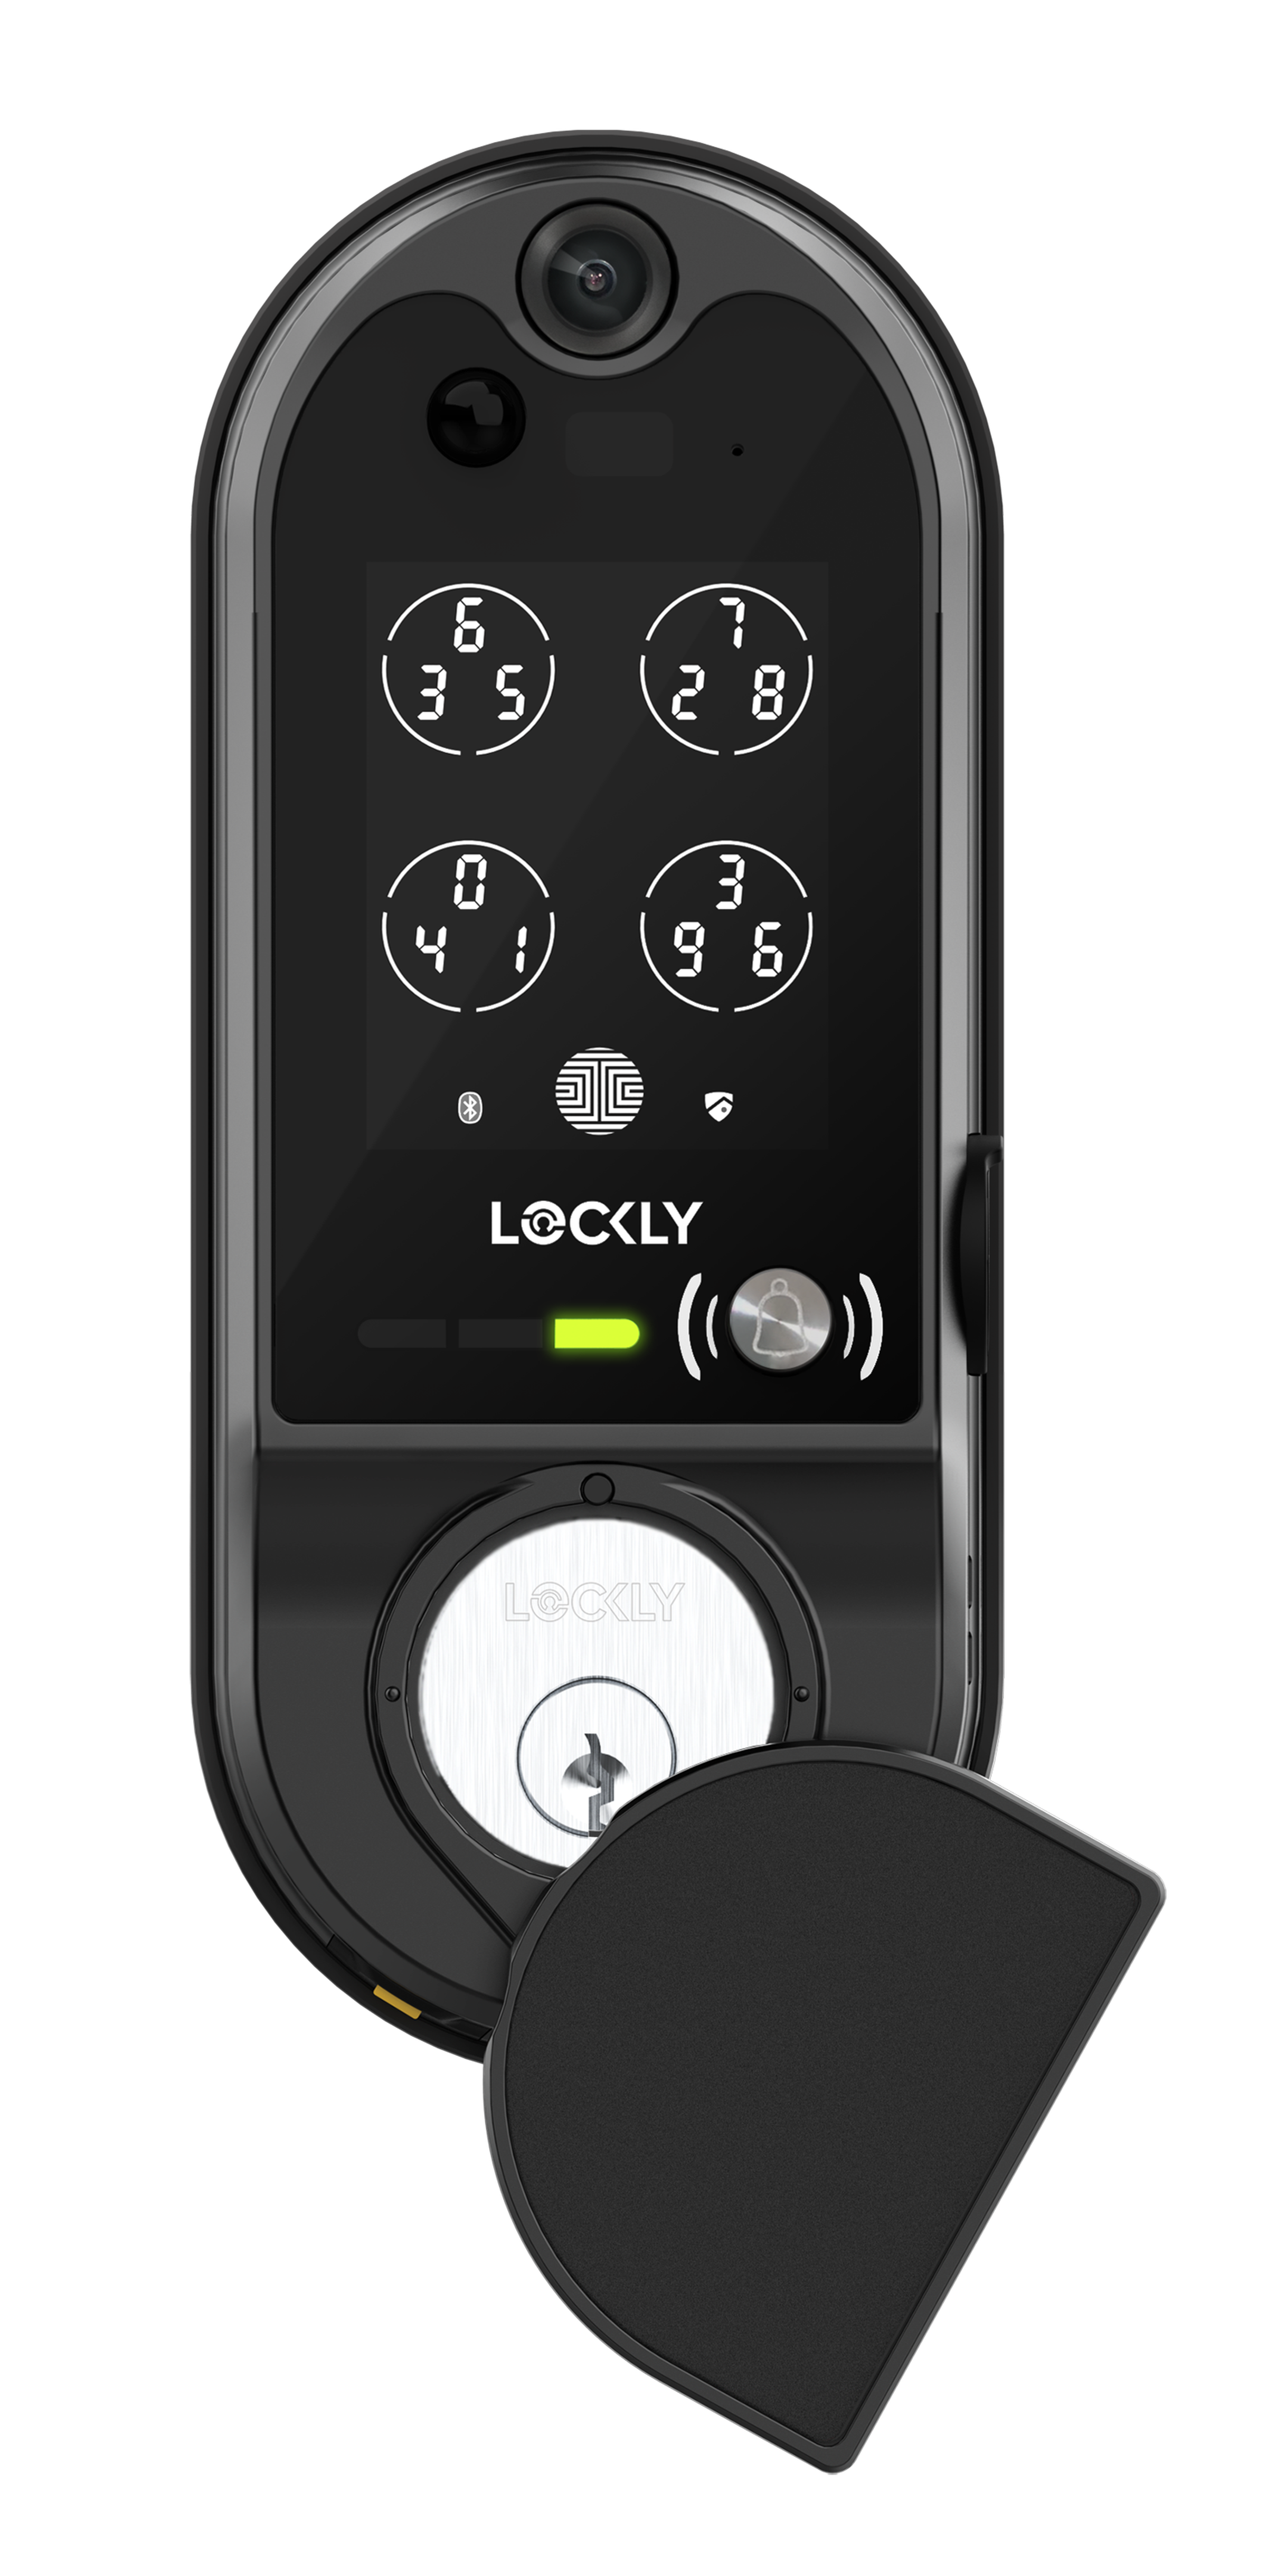 The Lockly Vision Elite has an adjustable solar panel that covers the lock’s keyhole.